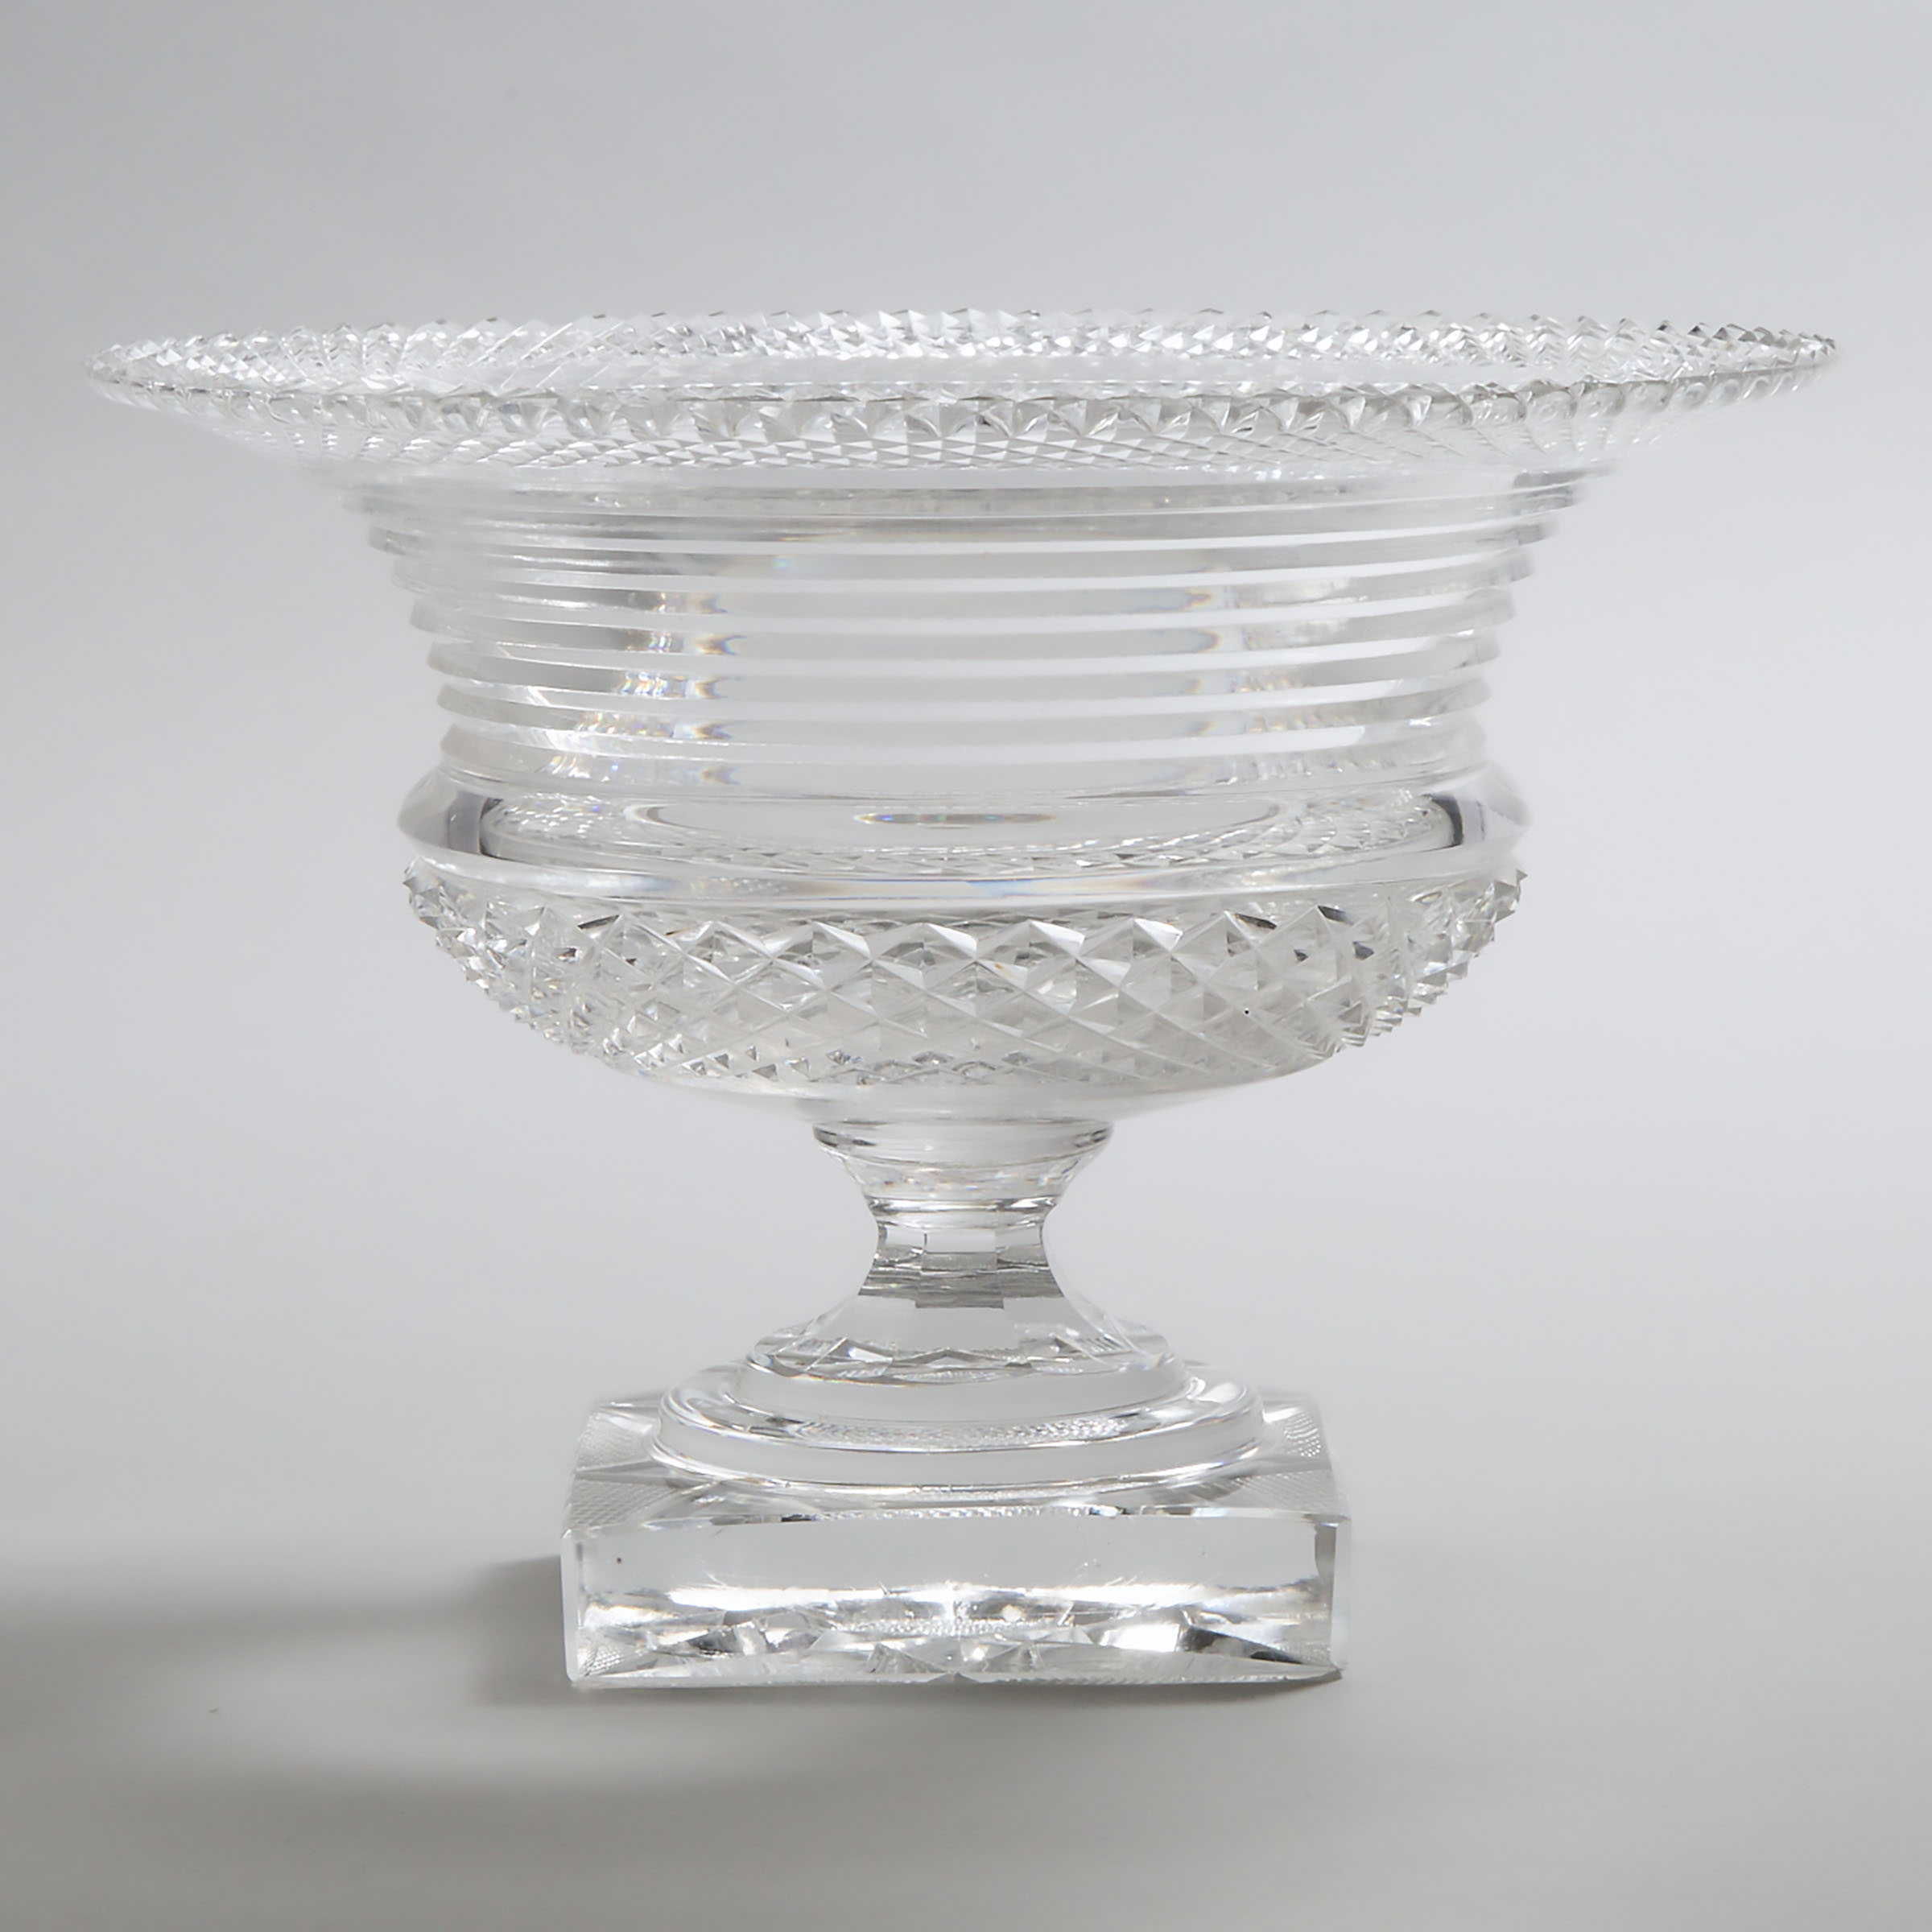 Anglo-Irish Cut Glass Pedestal-Footed Bowl, 19th/20th century